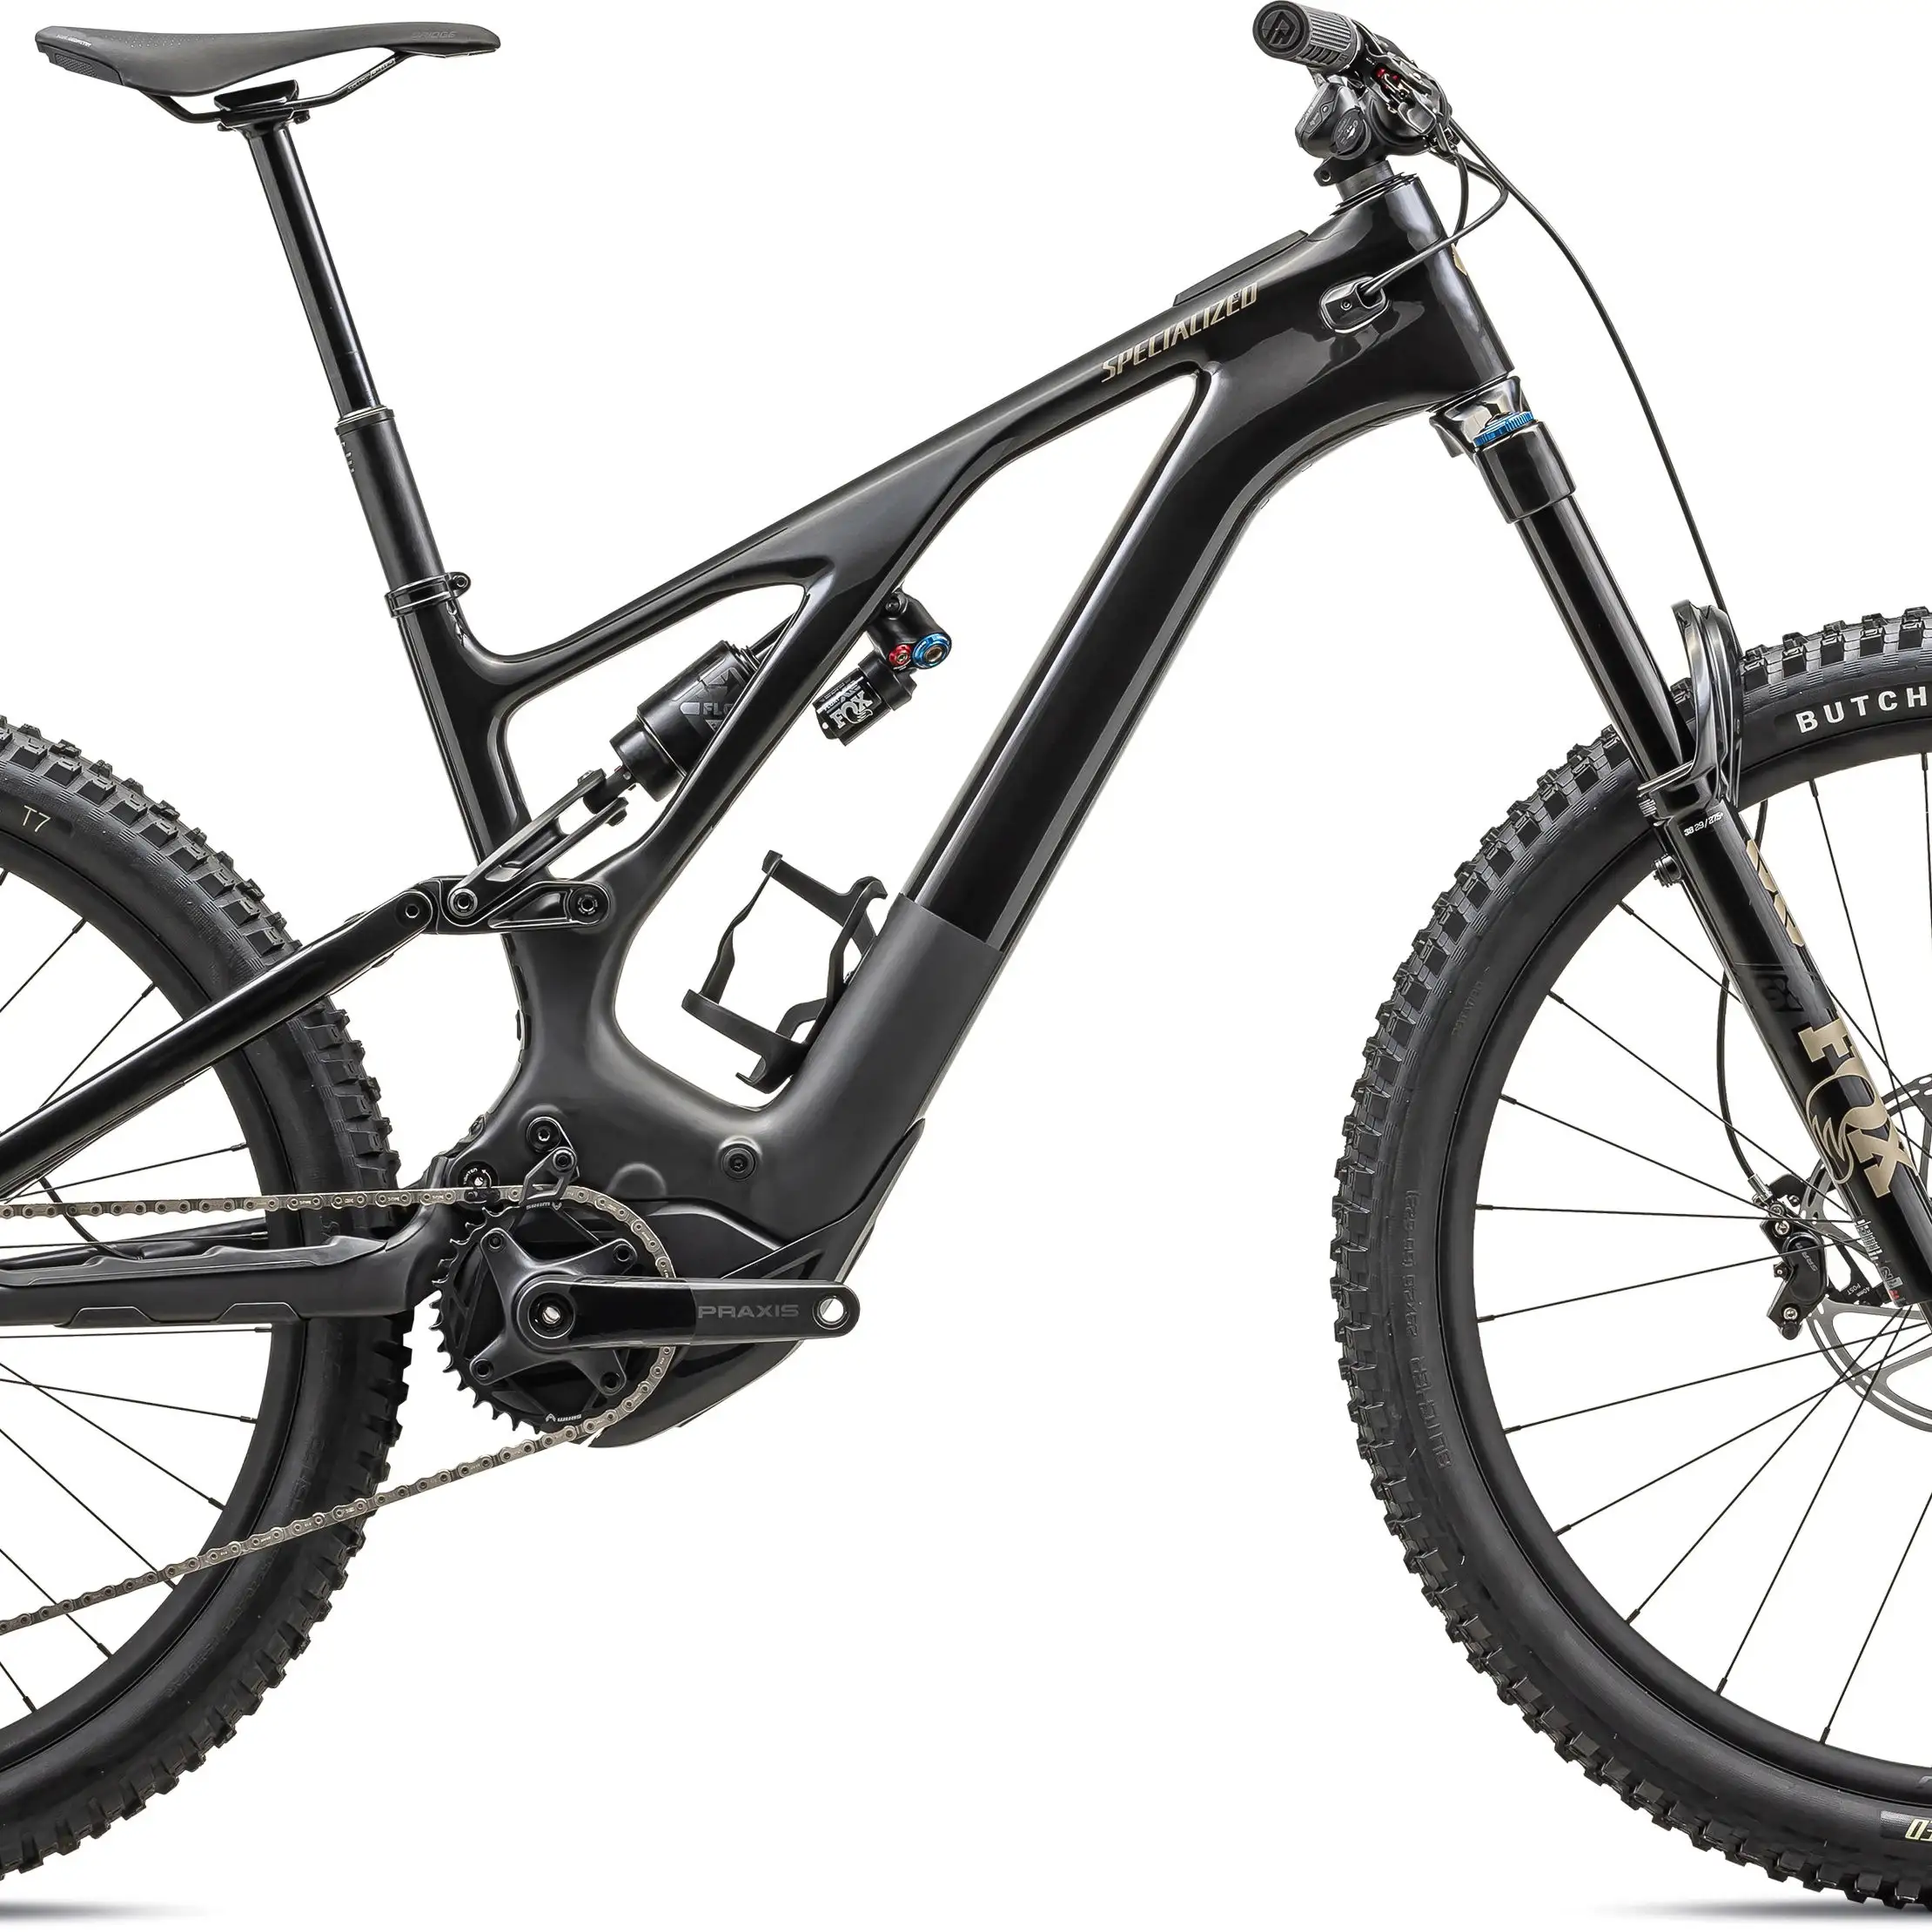 NEWLY FOR-Specializeds Tur bo Levo Expert T-Type Electric Mountain Bike